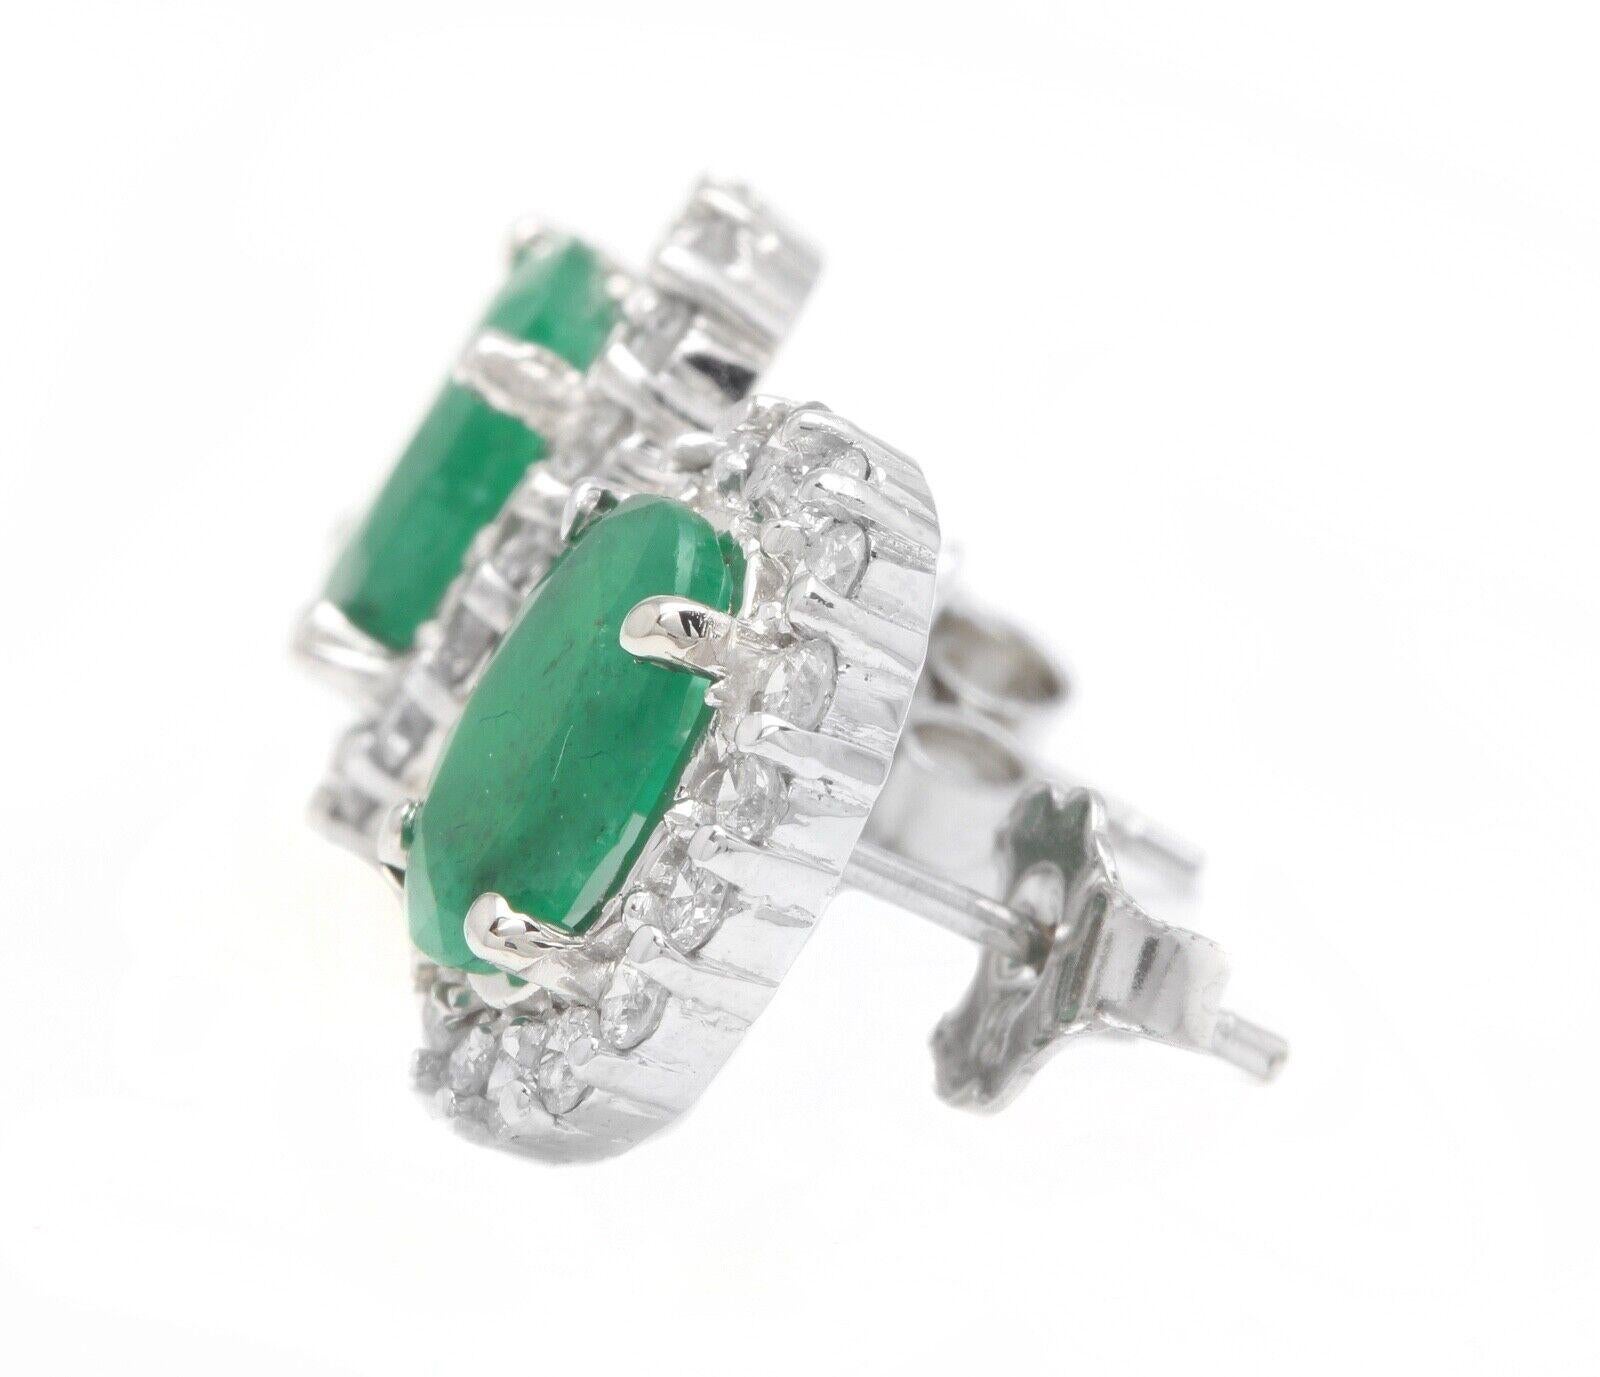 3.05 Carats Natural Emerald and Diamond 14K Solid White Gold Earrings

Amazing looking piece! 

Suggested Replacement Value Approx. $5,500.00

Total Natural Round Cut White Diamonds Weight: Approx.  0.75 Carats (color G-H / Clarity SI)

Total